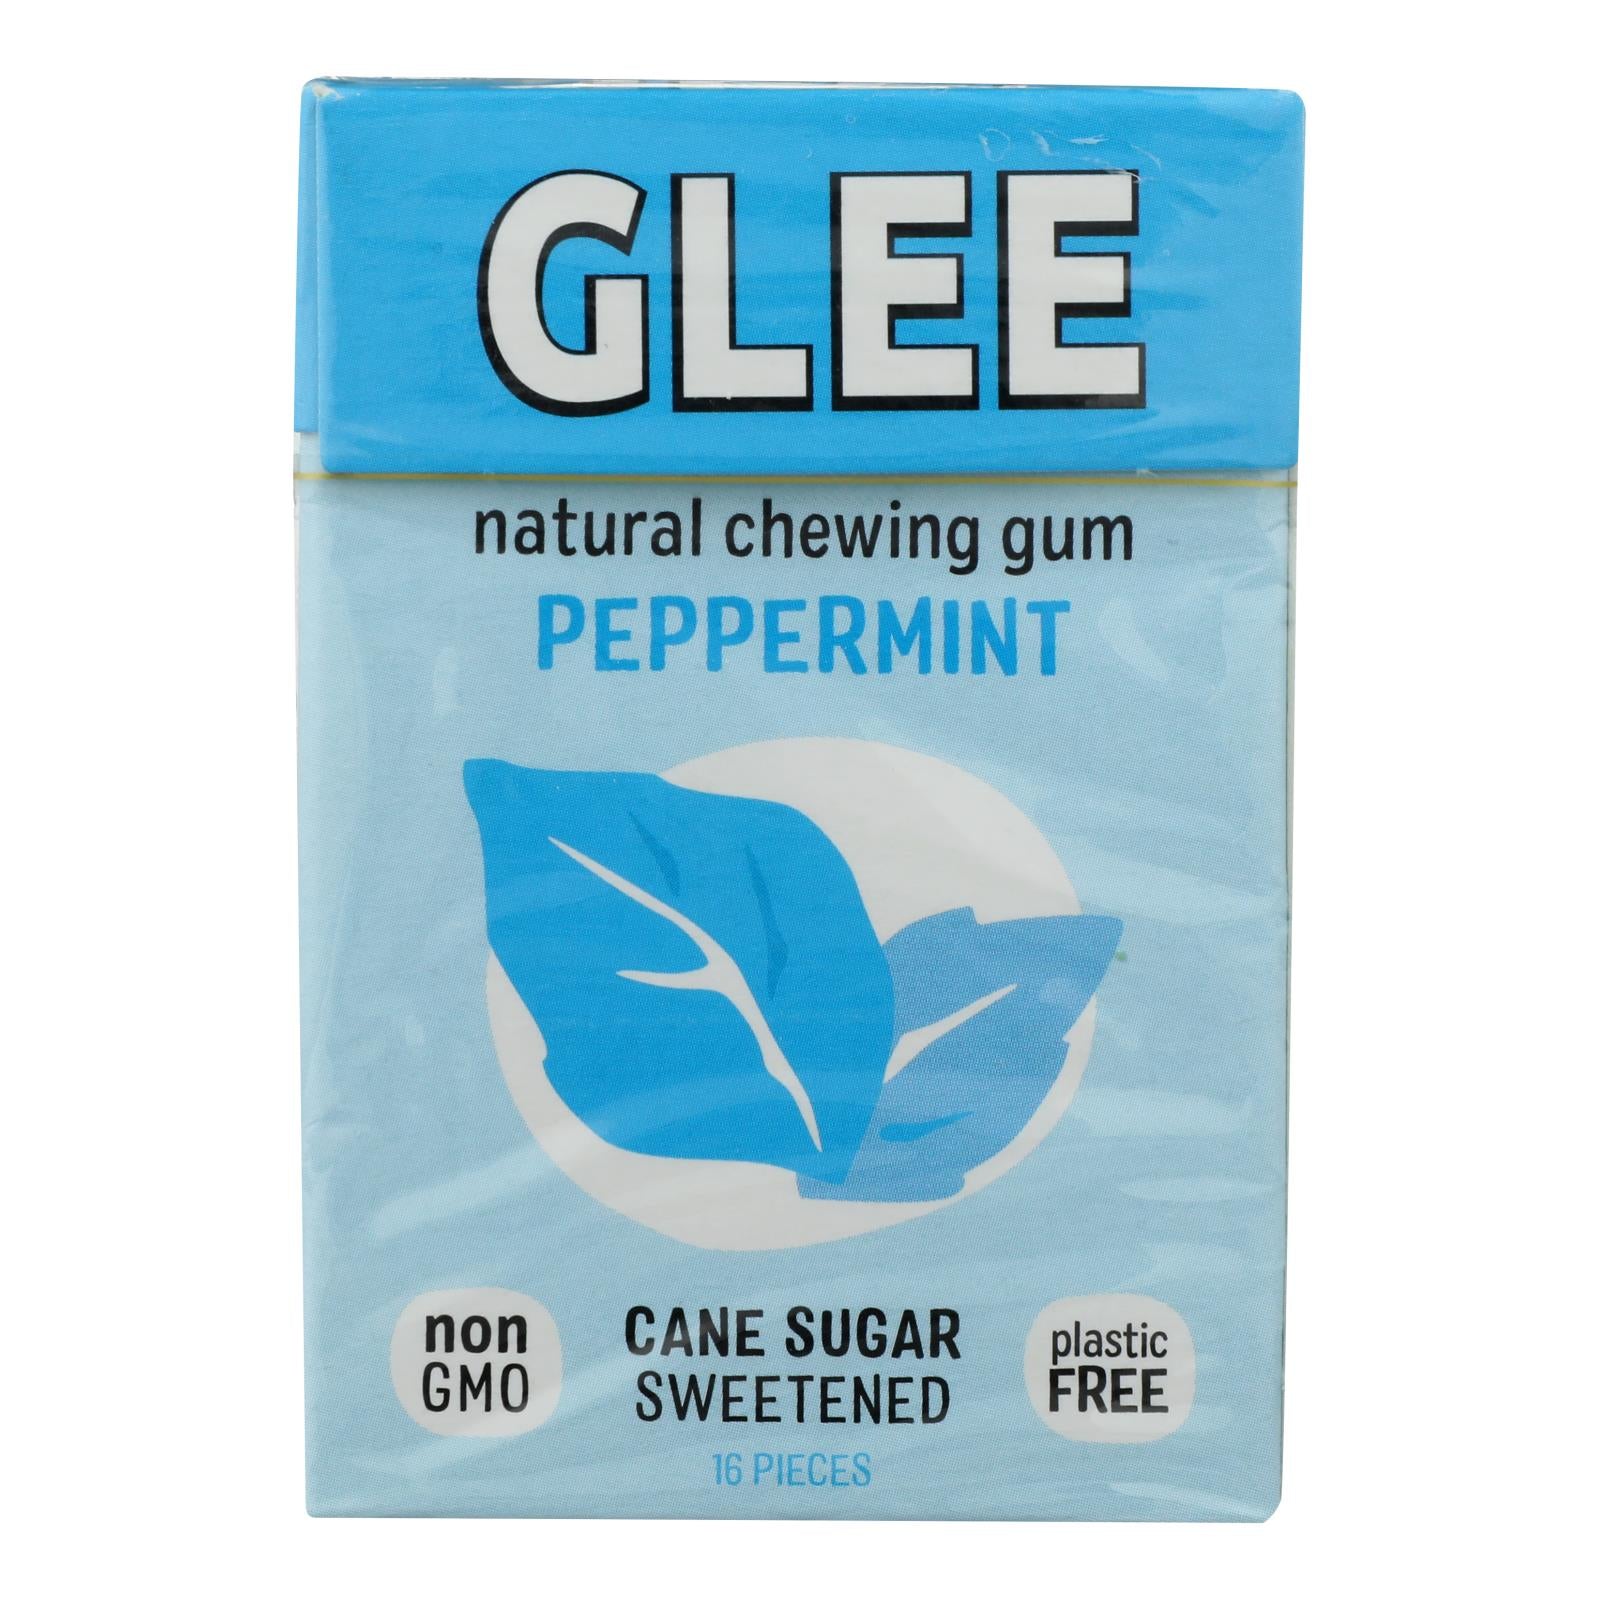 Glee Gum Chewing Gum - Peppermint - Case Of 12 - 16 Pieces